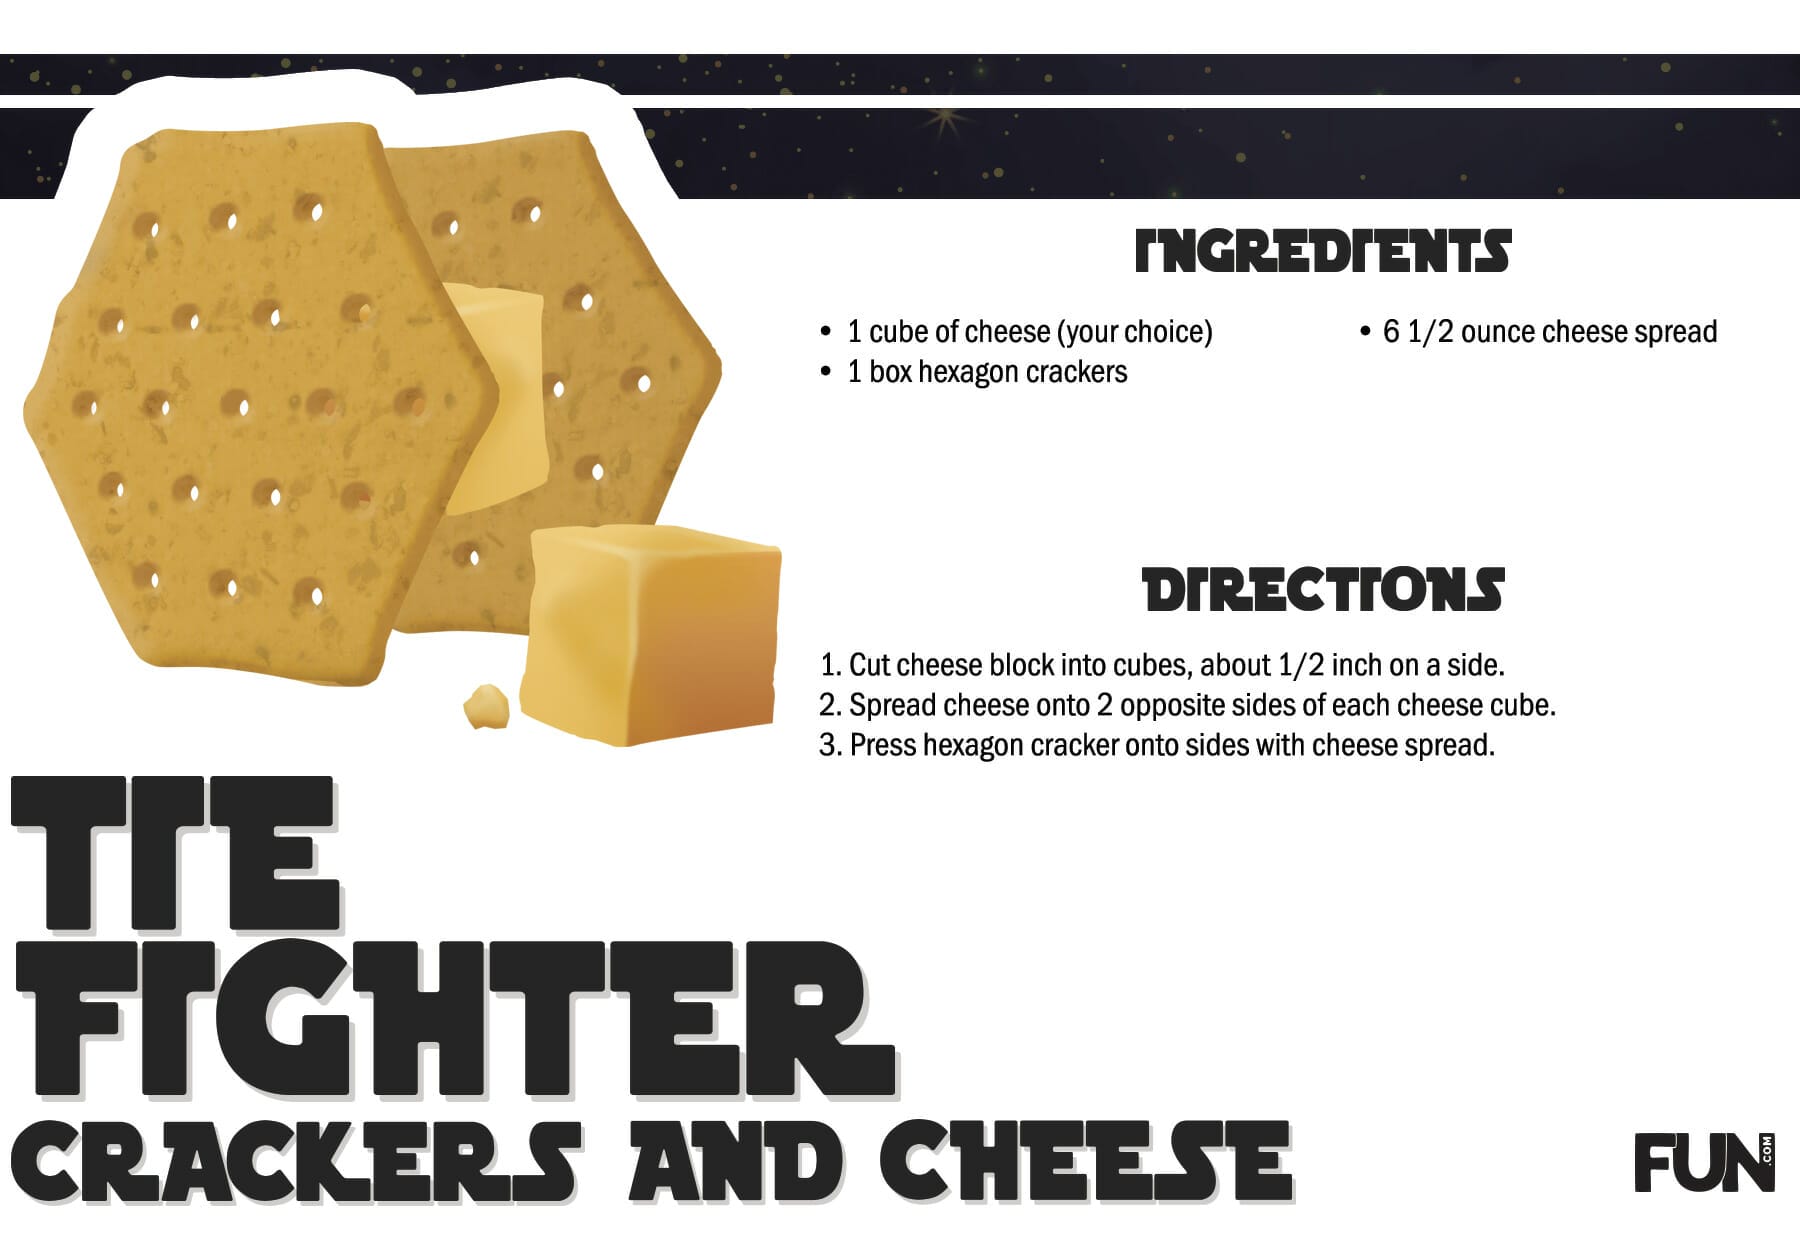 How to make Tie Fighter cheese and crackers